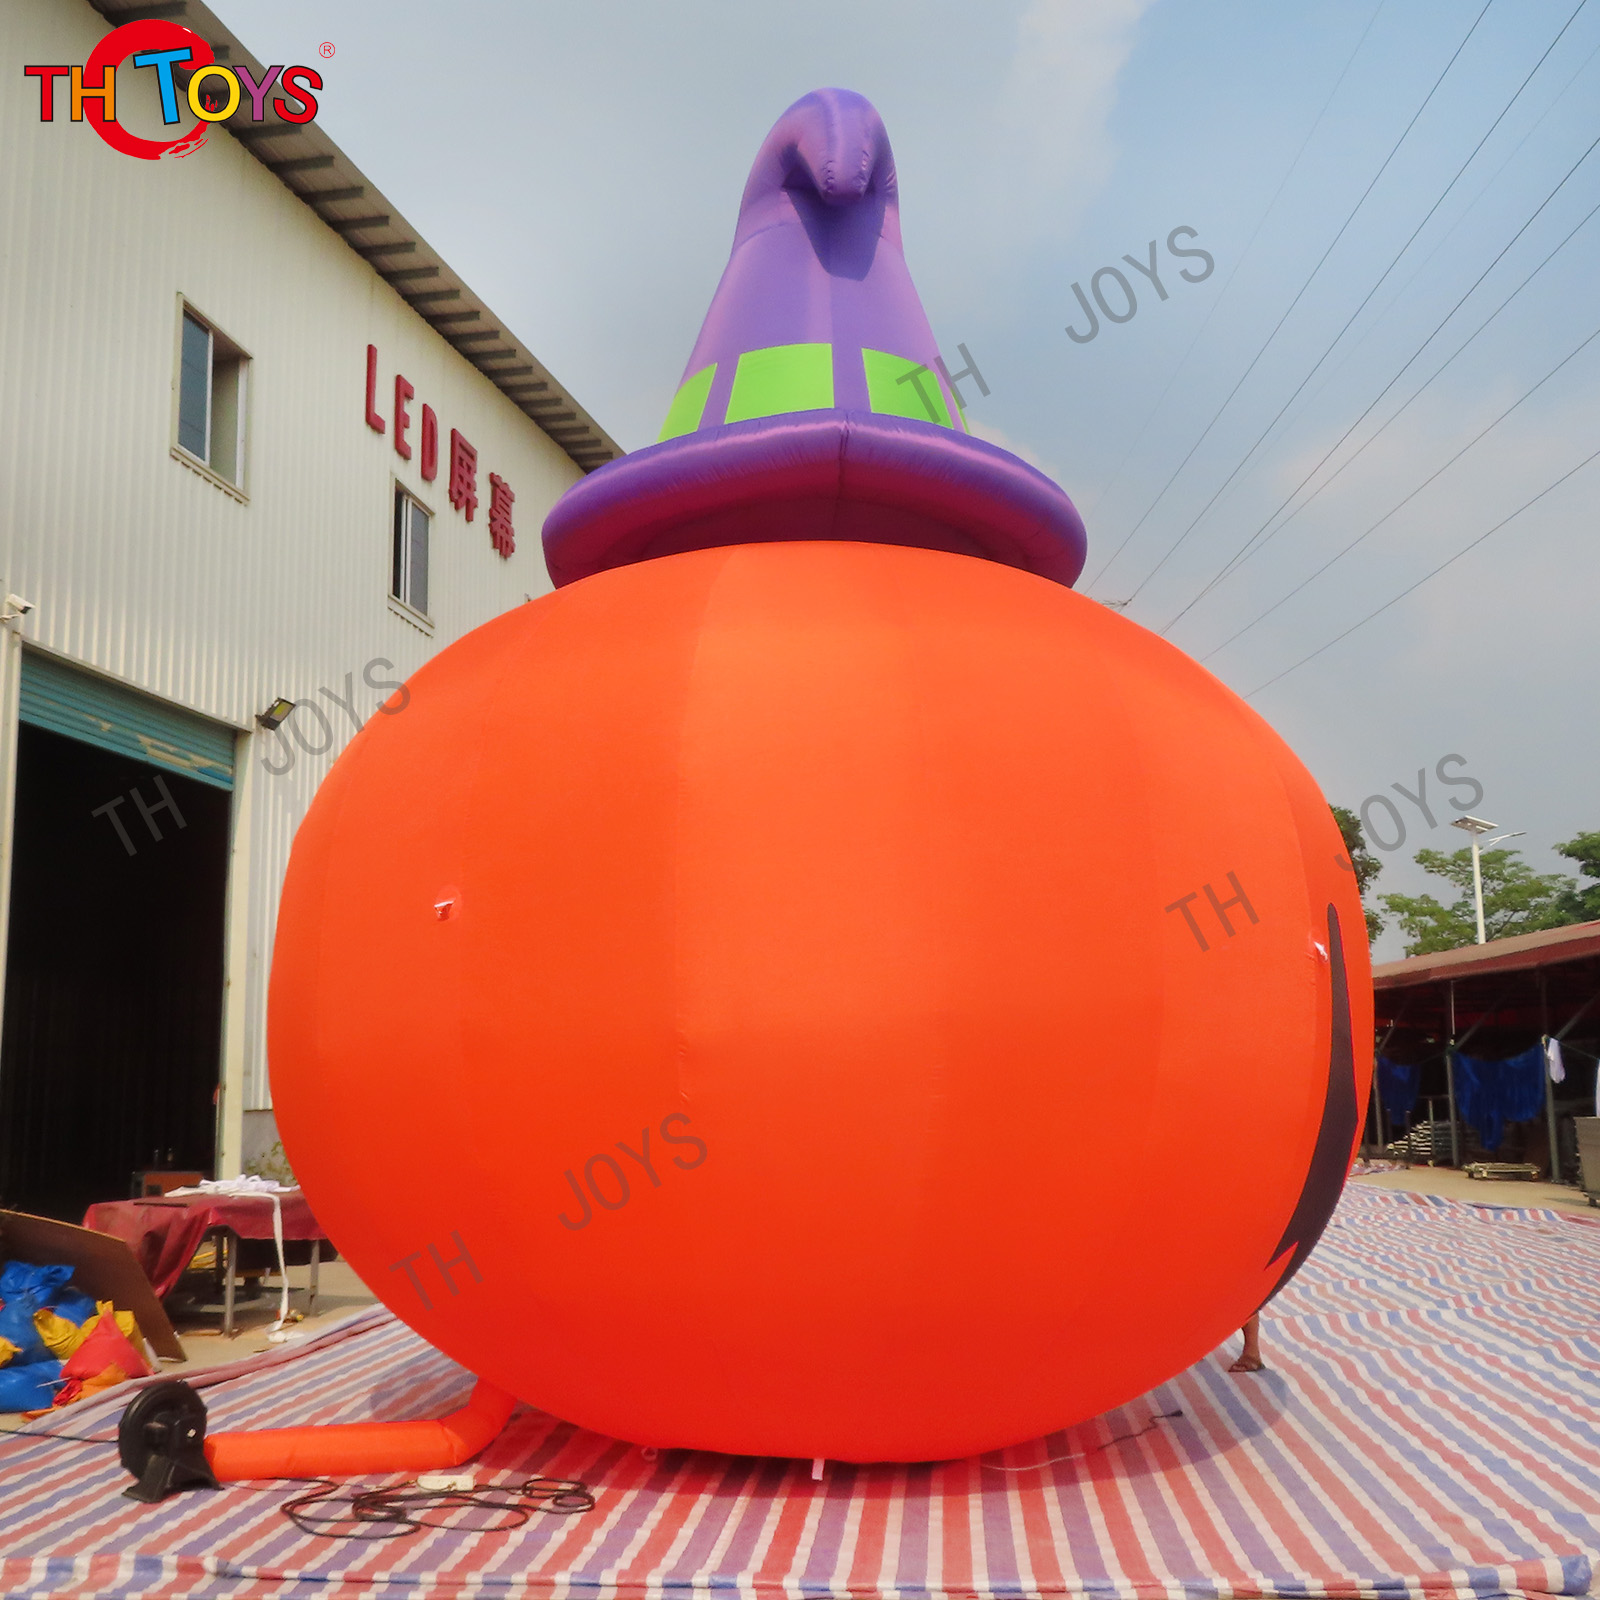  Inflatable Yard Decoration Halloween Party Decorations Halloween Inflatable Outdoor Pumpkin